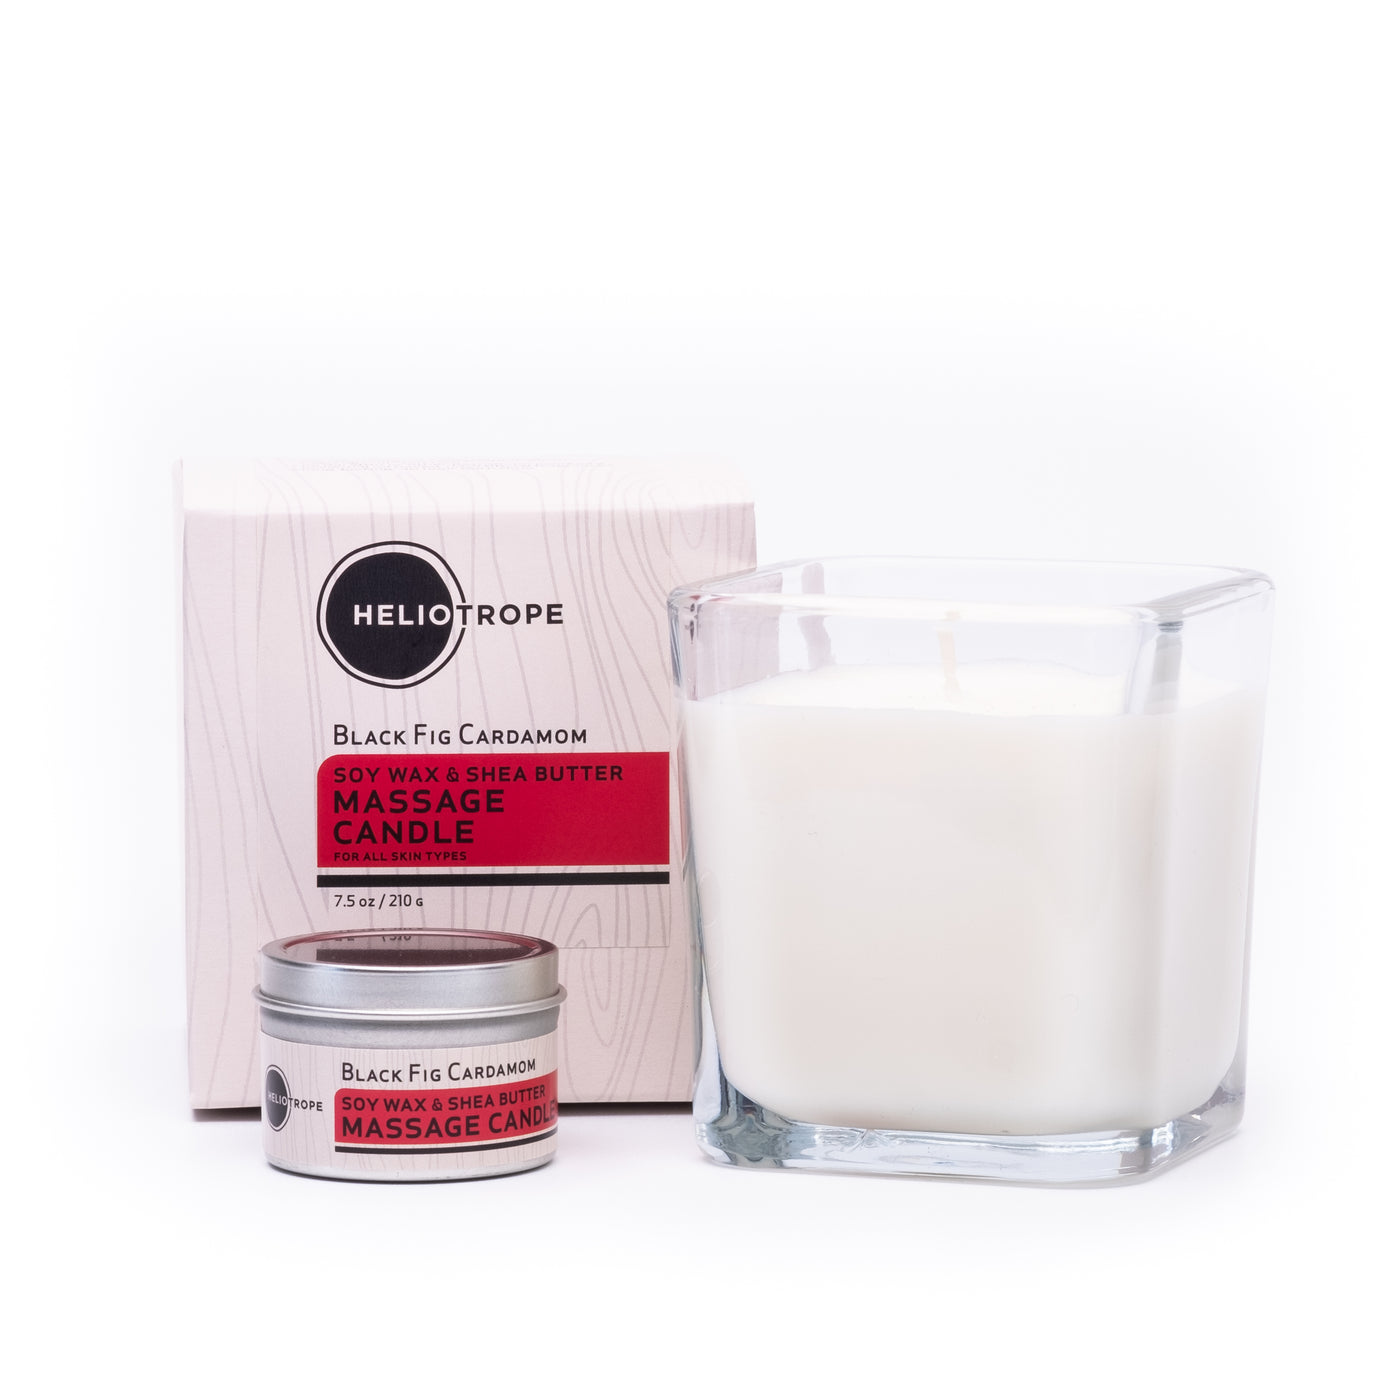 Soy Wax & Shea Butter Massage Candles by Heliotrope San Francisco